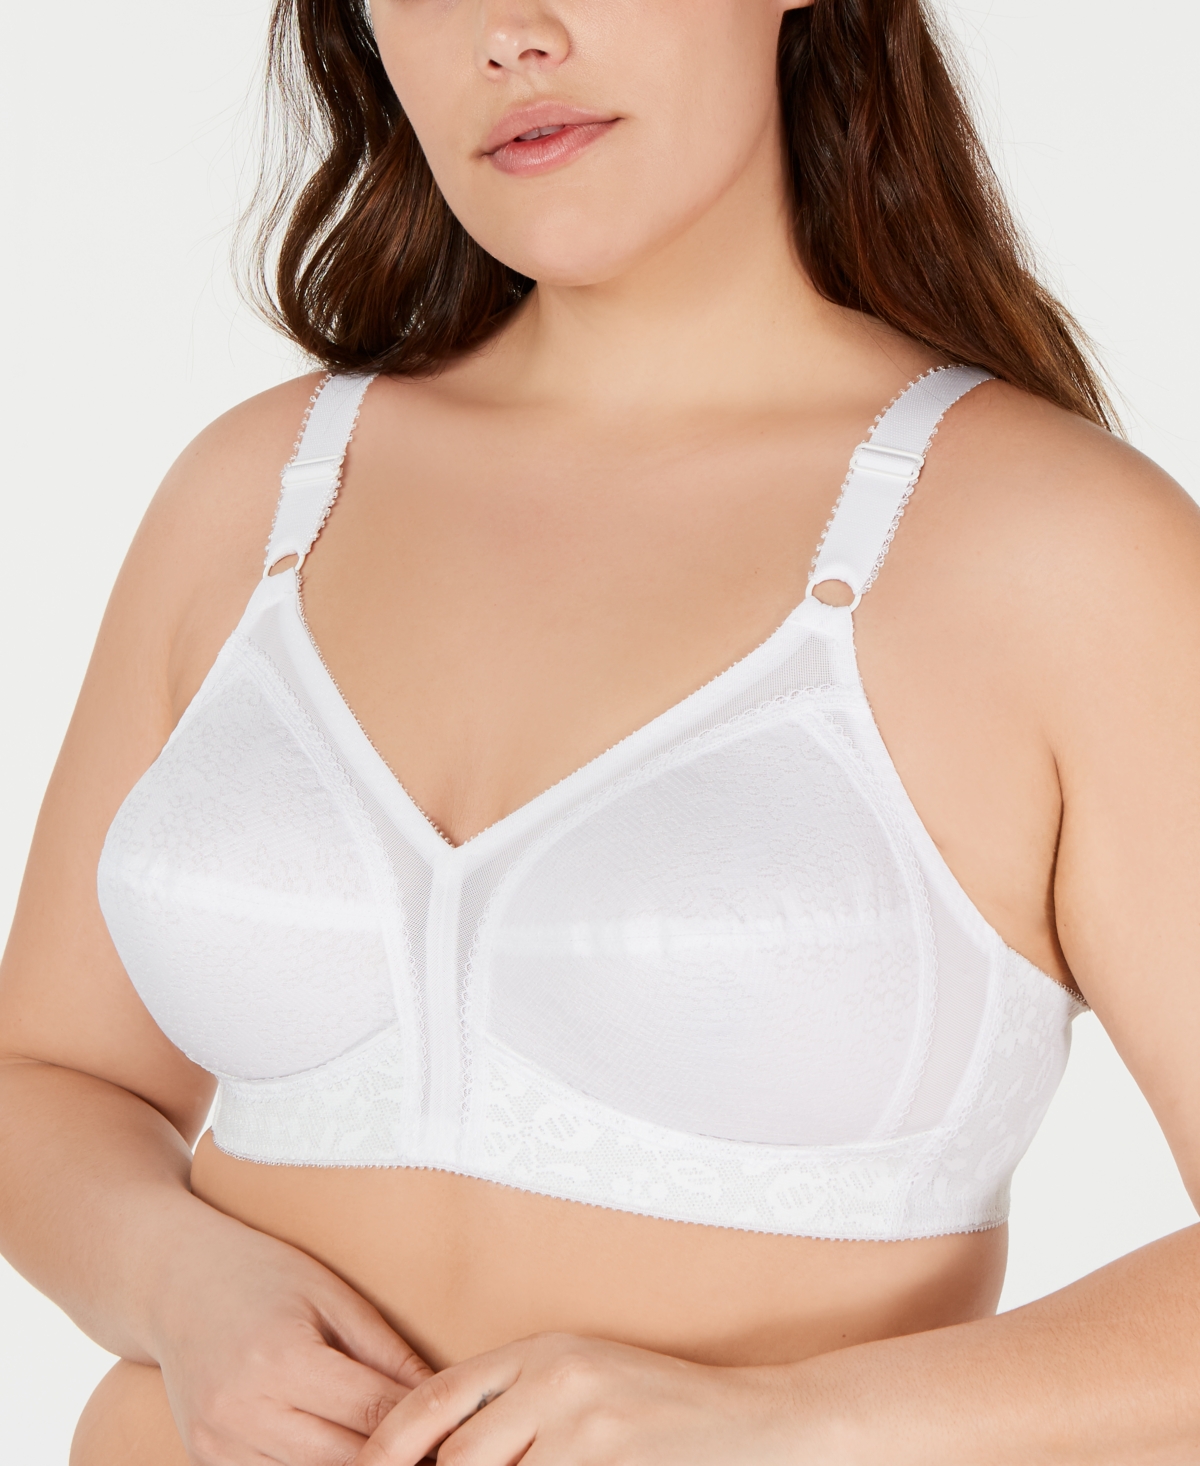 UPC 042714048848 product image for Playtex 18 Hour Sensational Support Wireless Bra 20/27, Online Only | upcitemdb.com